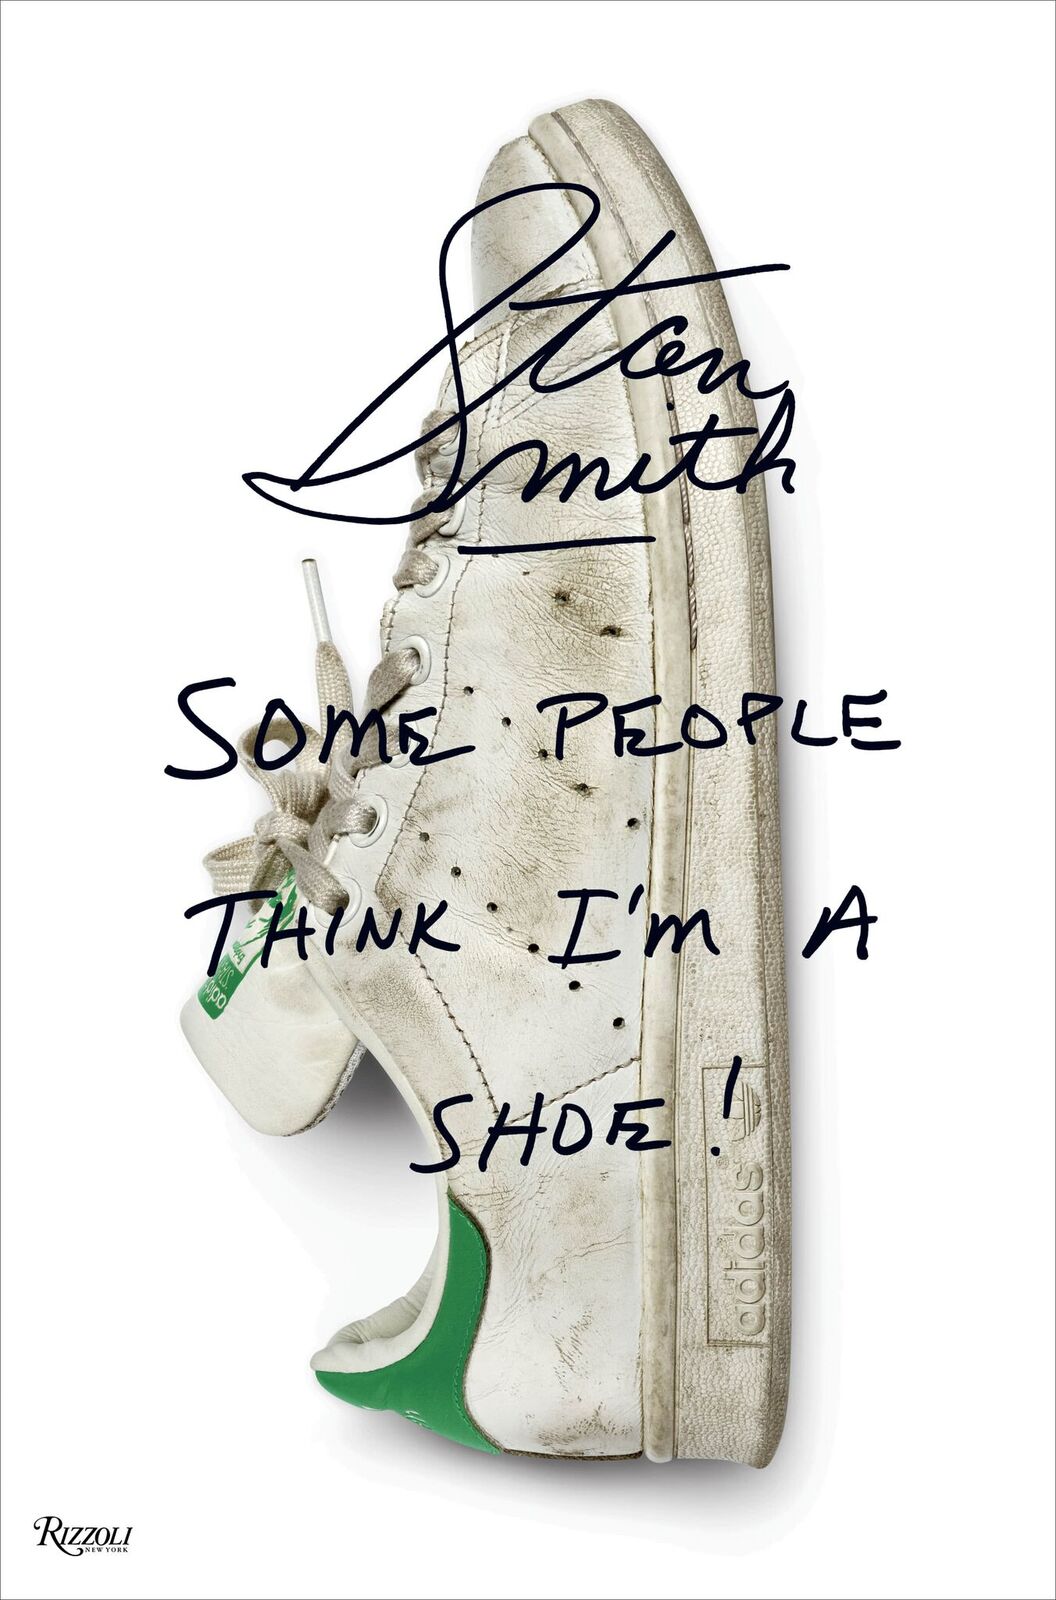 Stan Smith: Some People Think I Am a 